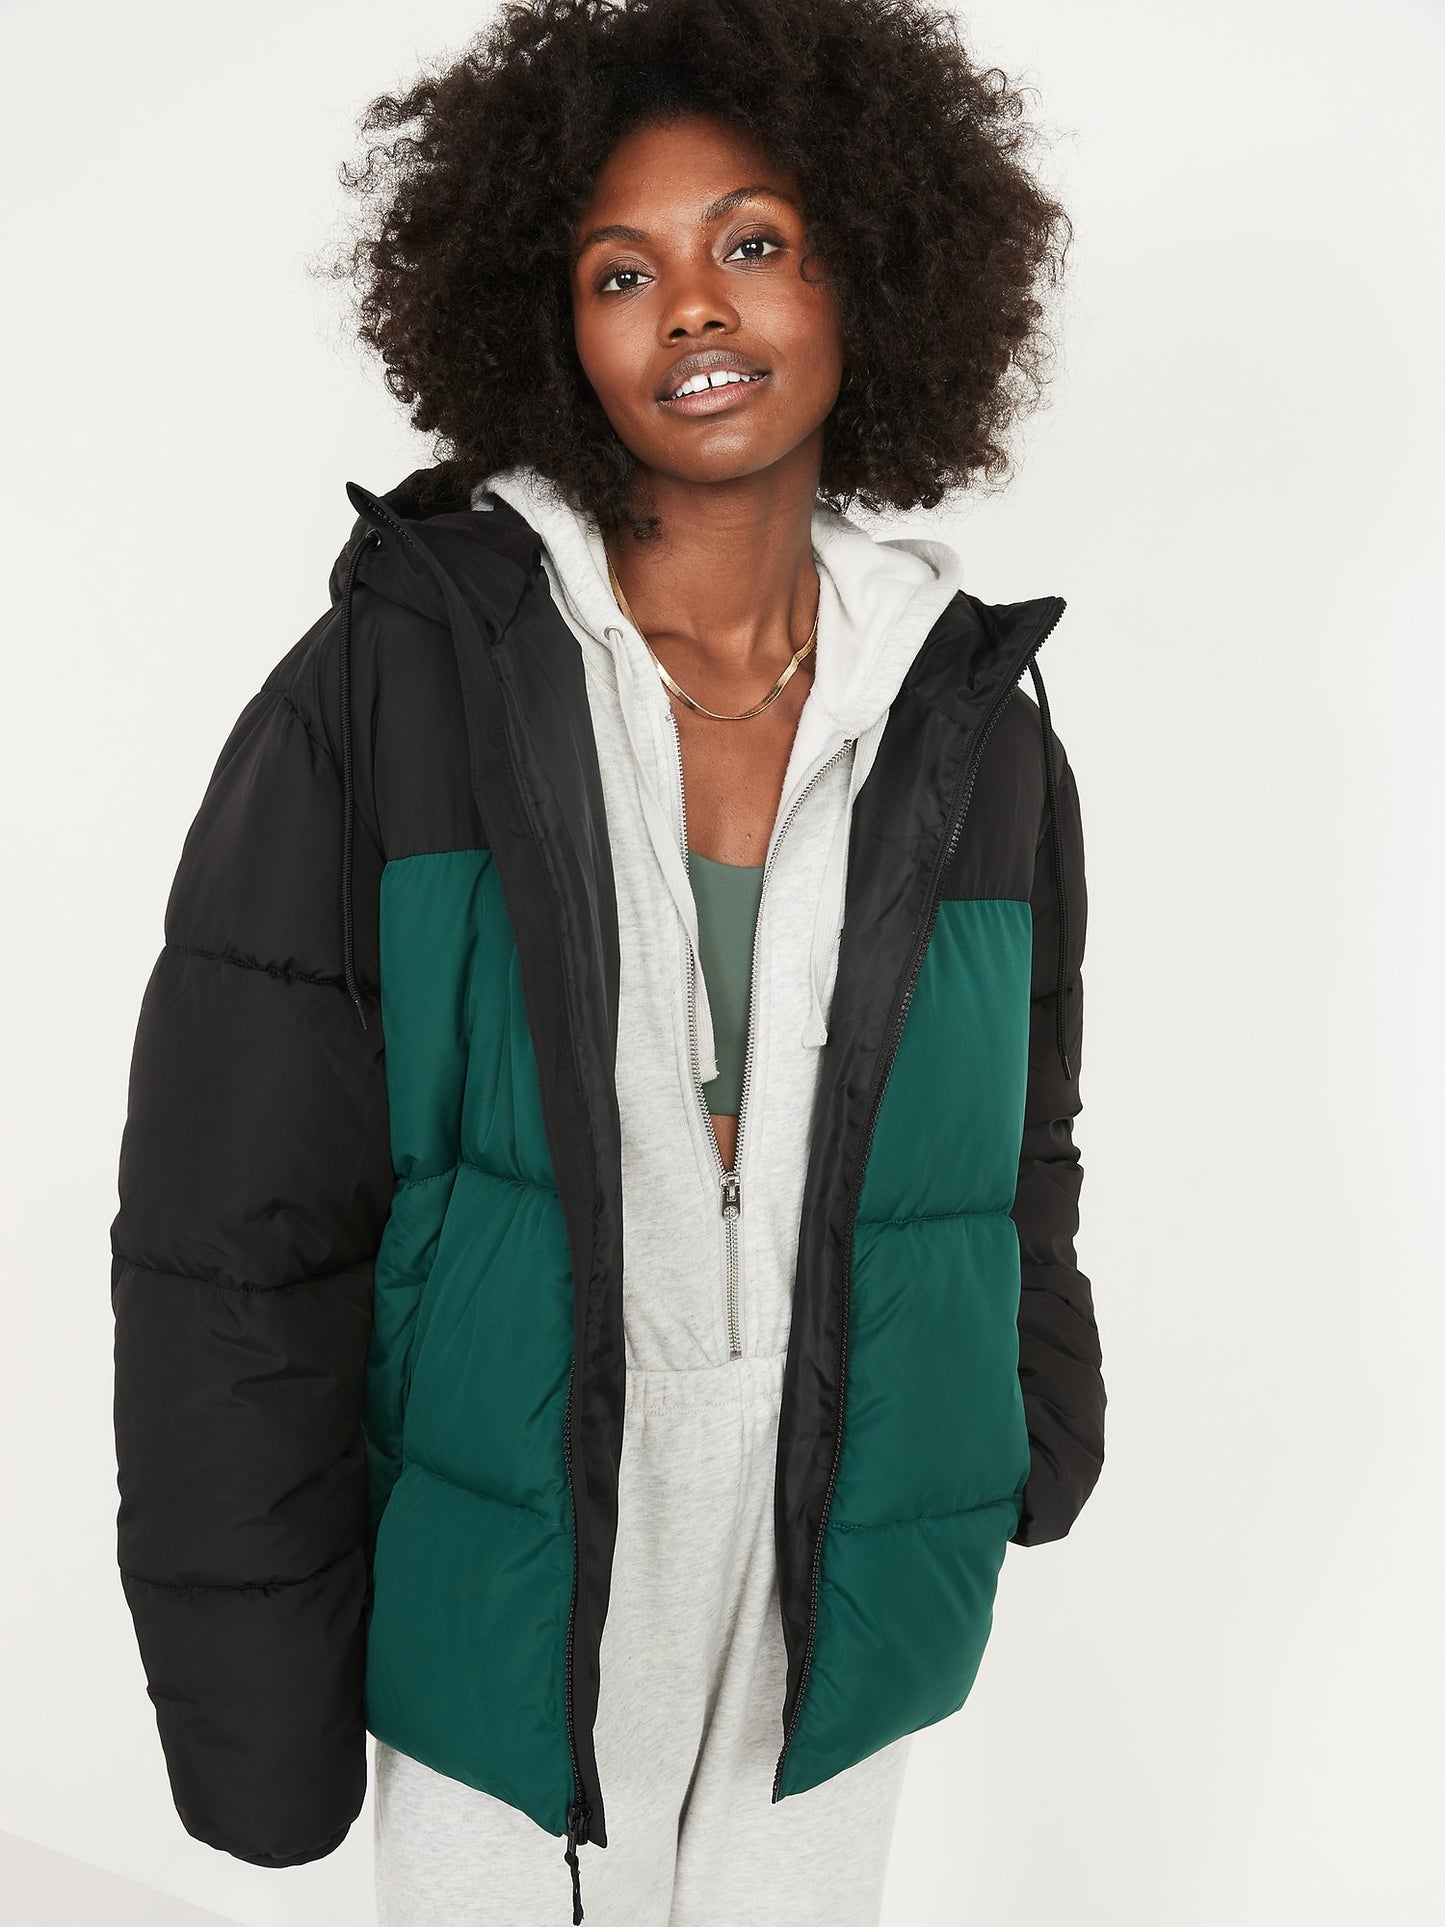 ON Frost-Free Water-Resistant Hooded Gender-Neutral Puffer Jacket For Adults - Botanical Green